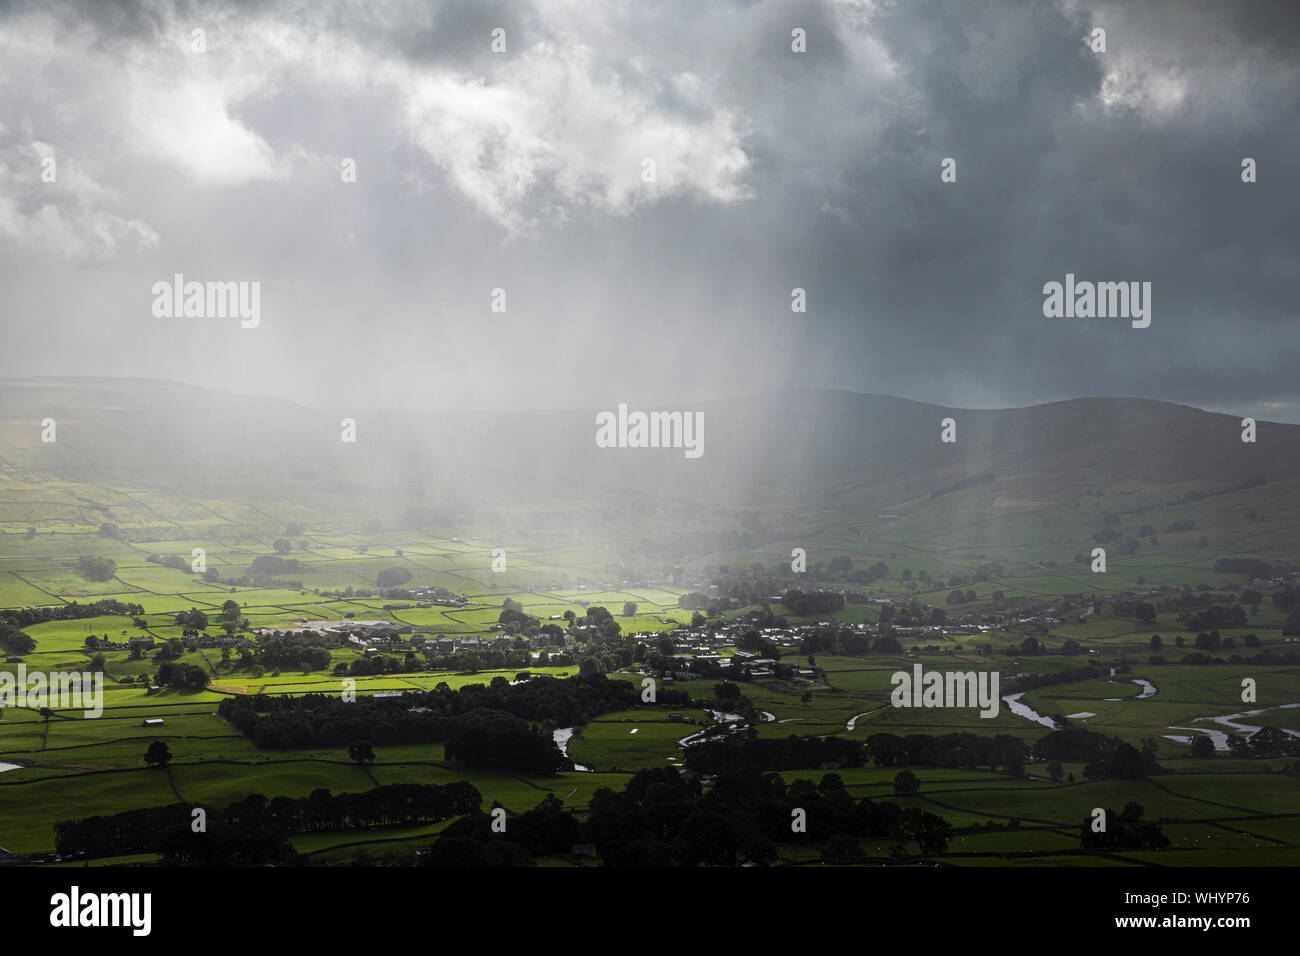 Sturm Clearing in Wensleydale, Yorkshire Dales National Park, North Yorkshire Stockfoto